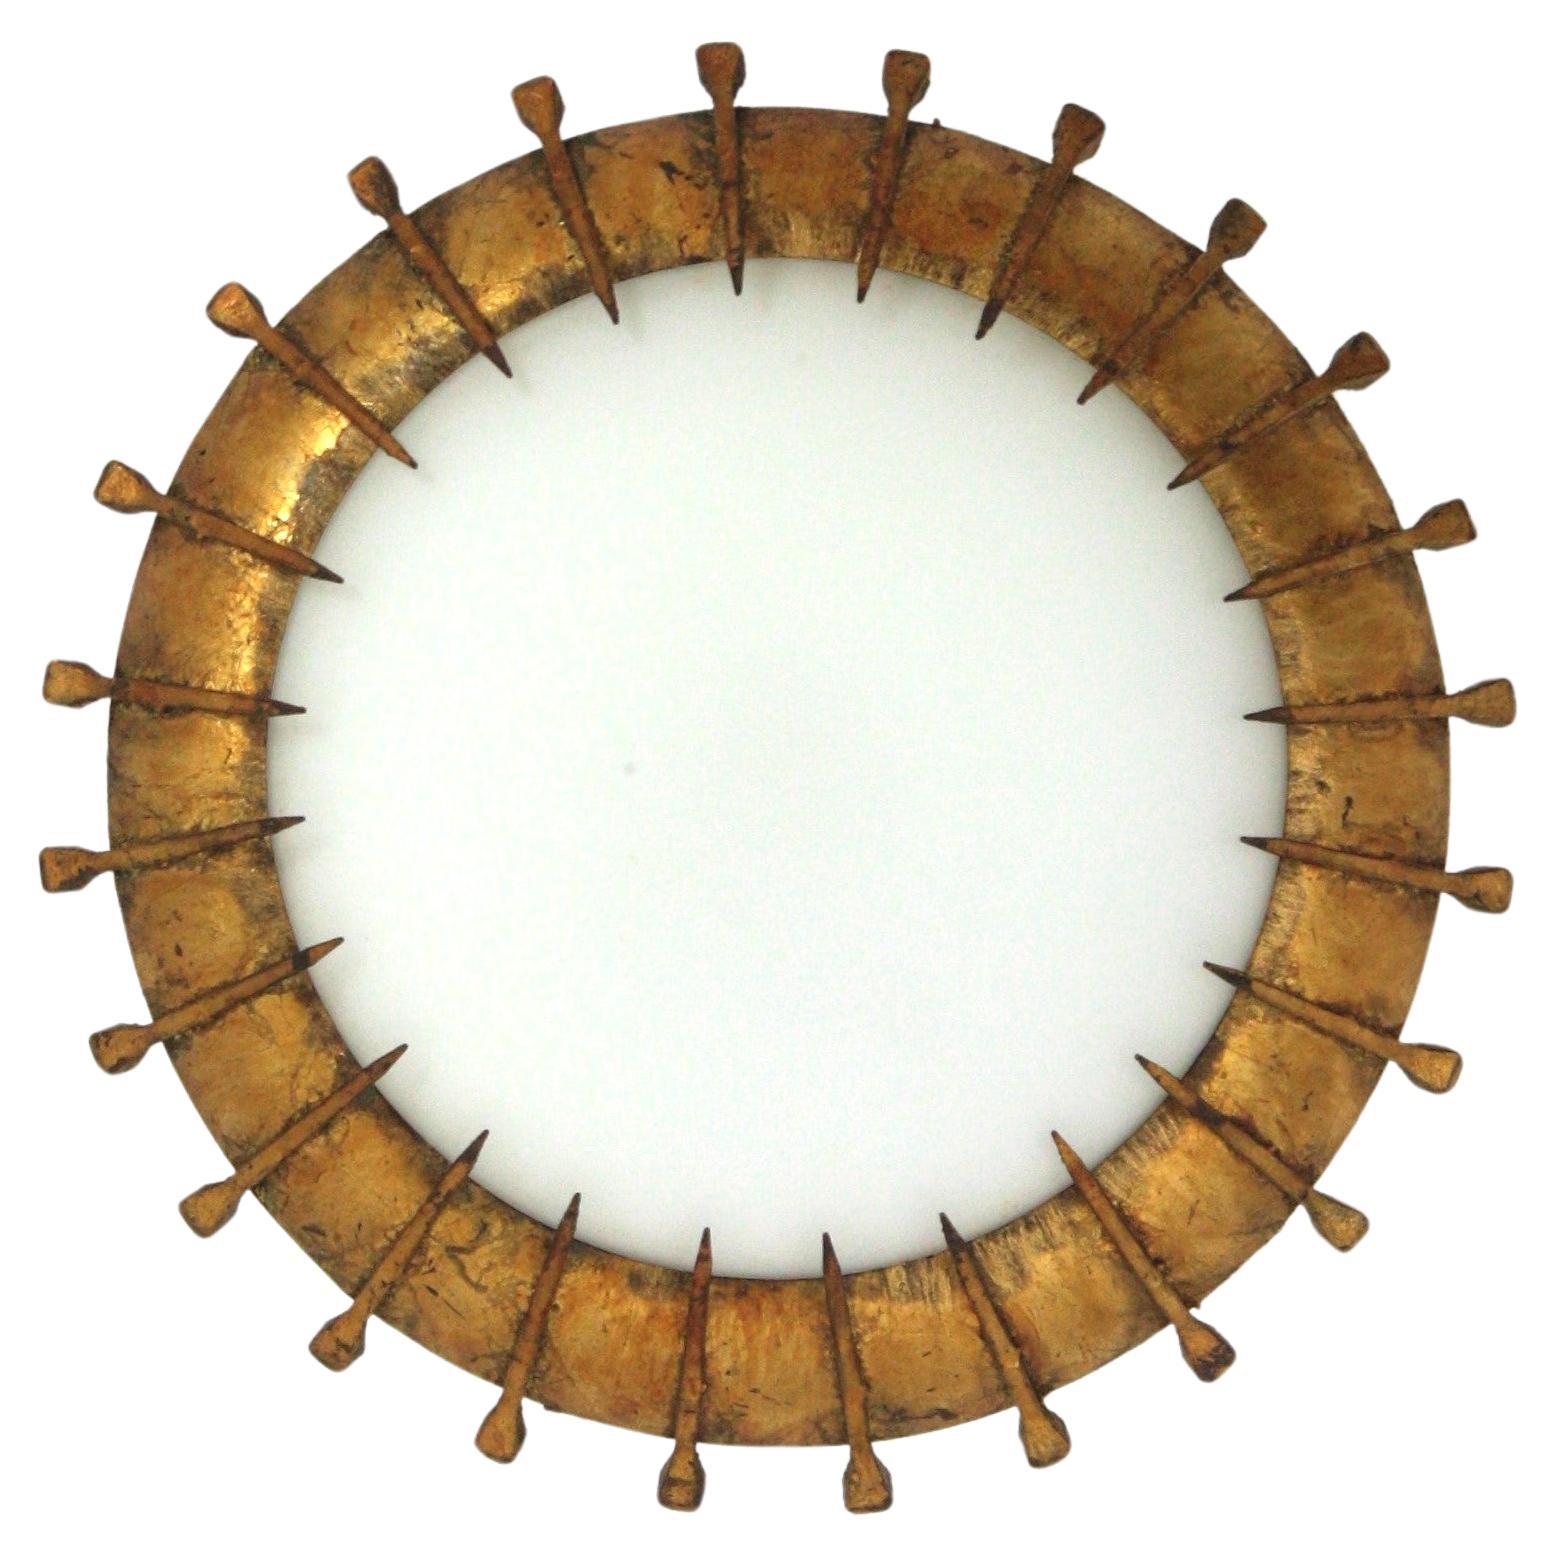 Nail Design sunburst flush mount, gilt wrought iron, milk glass, France, 1940s-1950s.
Hand-hammered iron and opaline glass sunburst flush mount with nails decoration and gold leaf finish. 
Beautiful to place it alone but also interesting mixed with